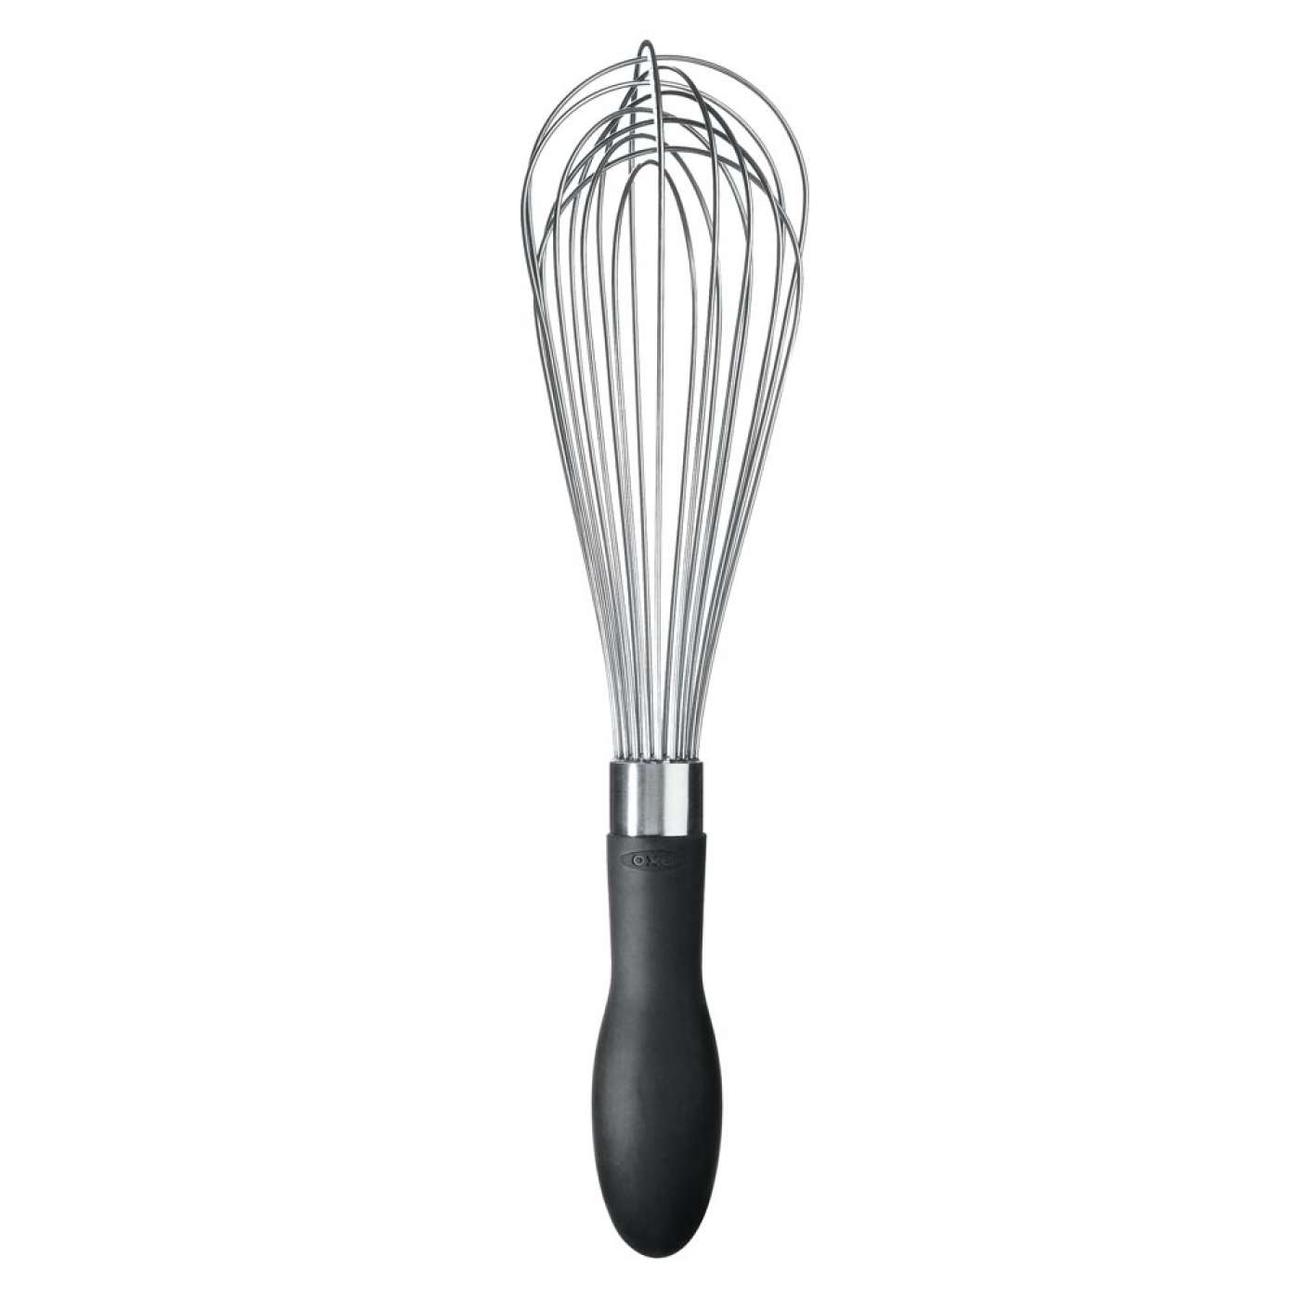 https://www.thekitchenwhisk.ie/contentfiles/productImages/Large/11Whisk.jpg